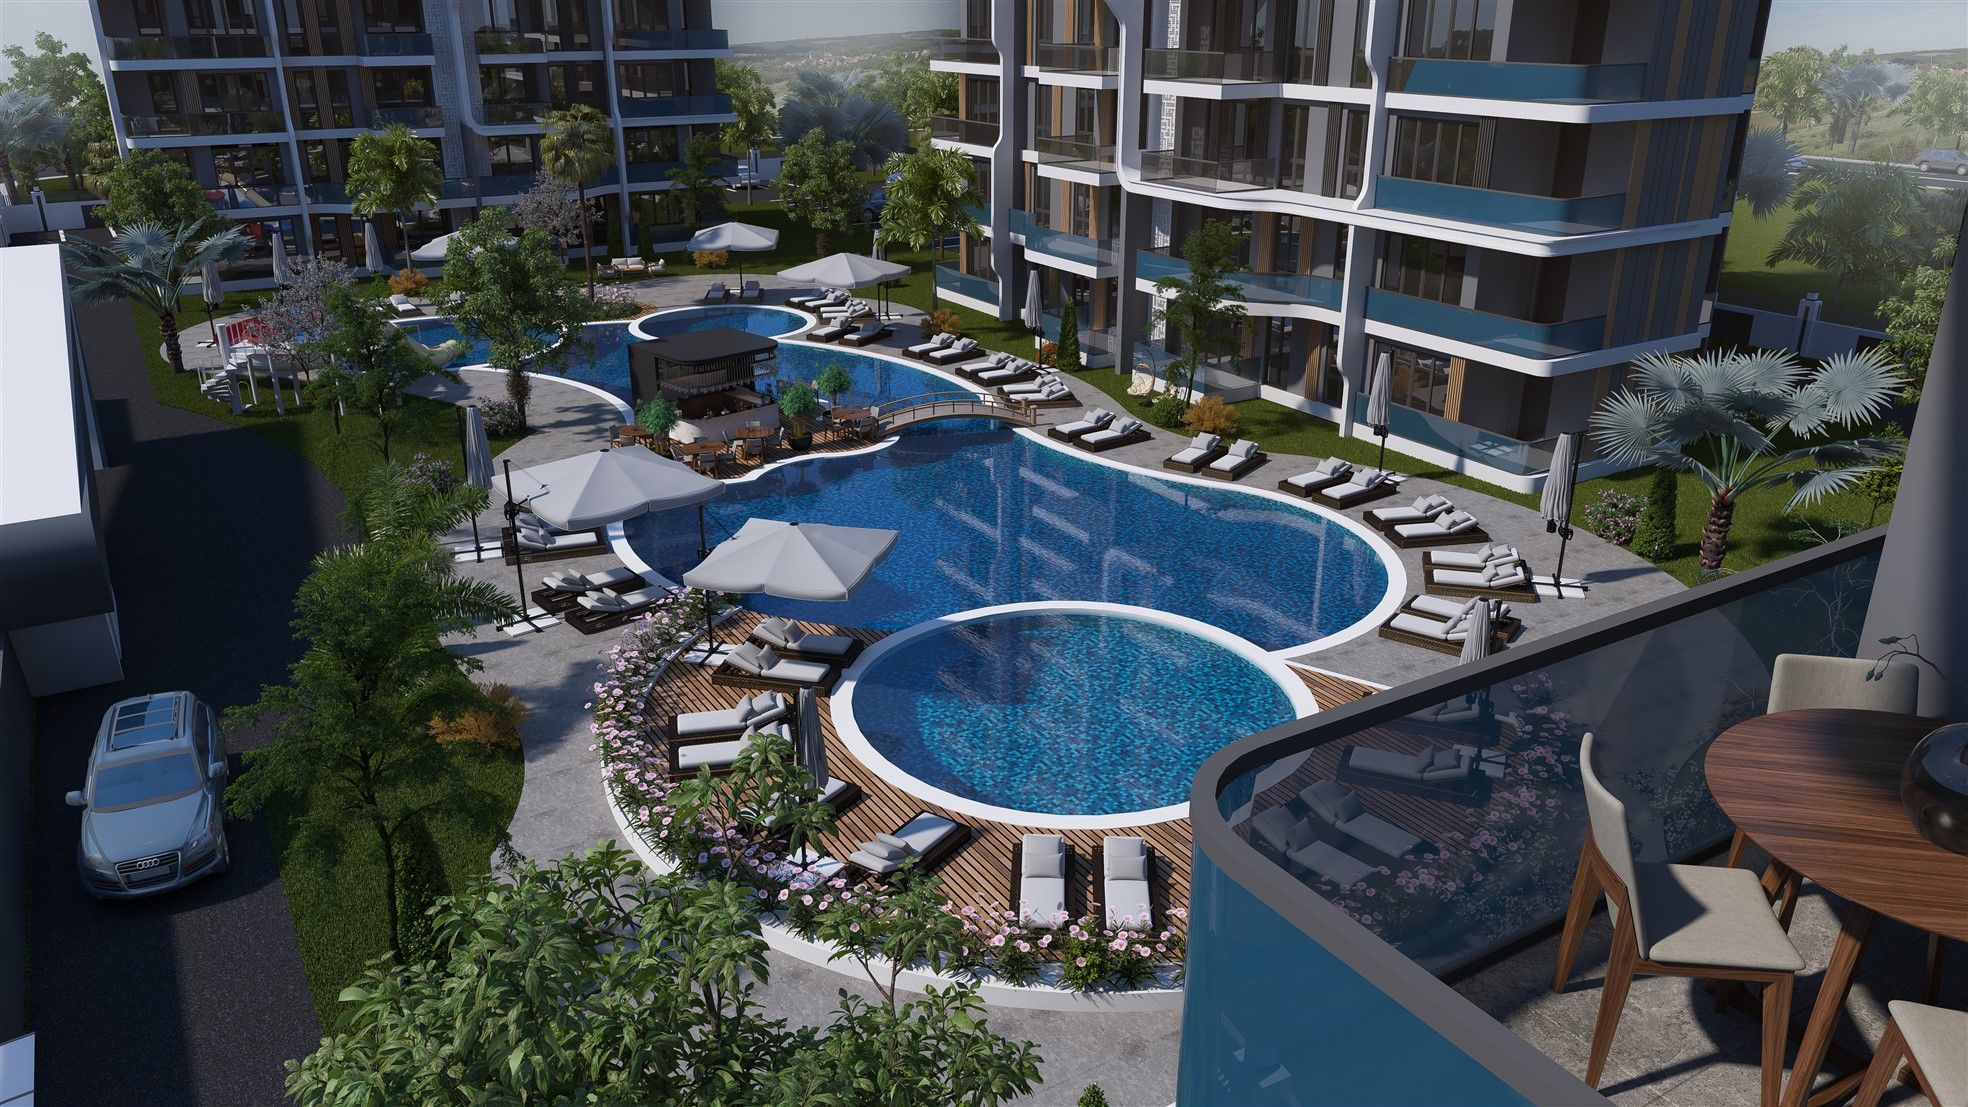 Family concept complex in a new district of Antalya - Altintash